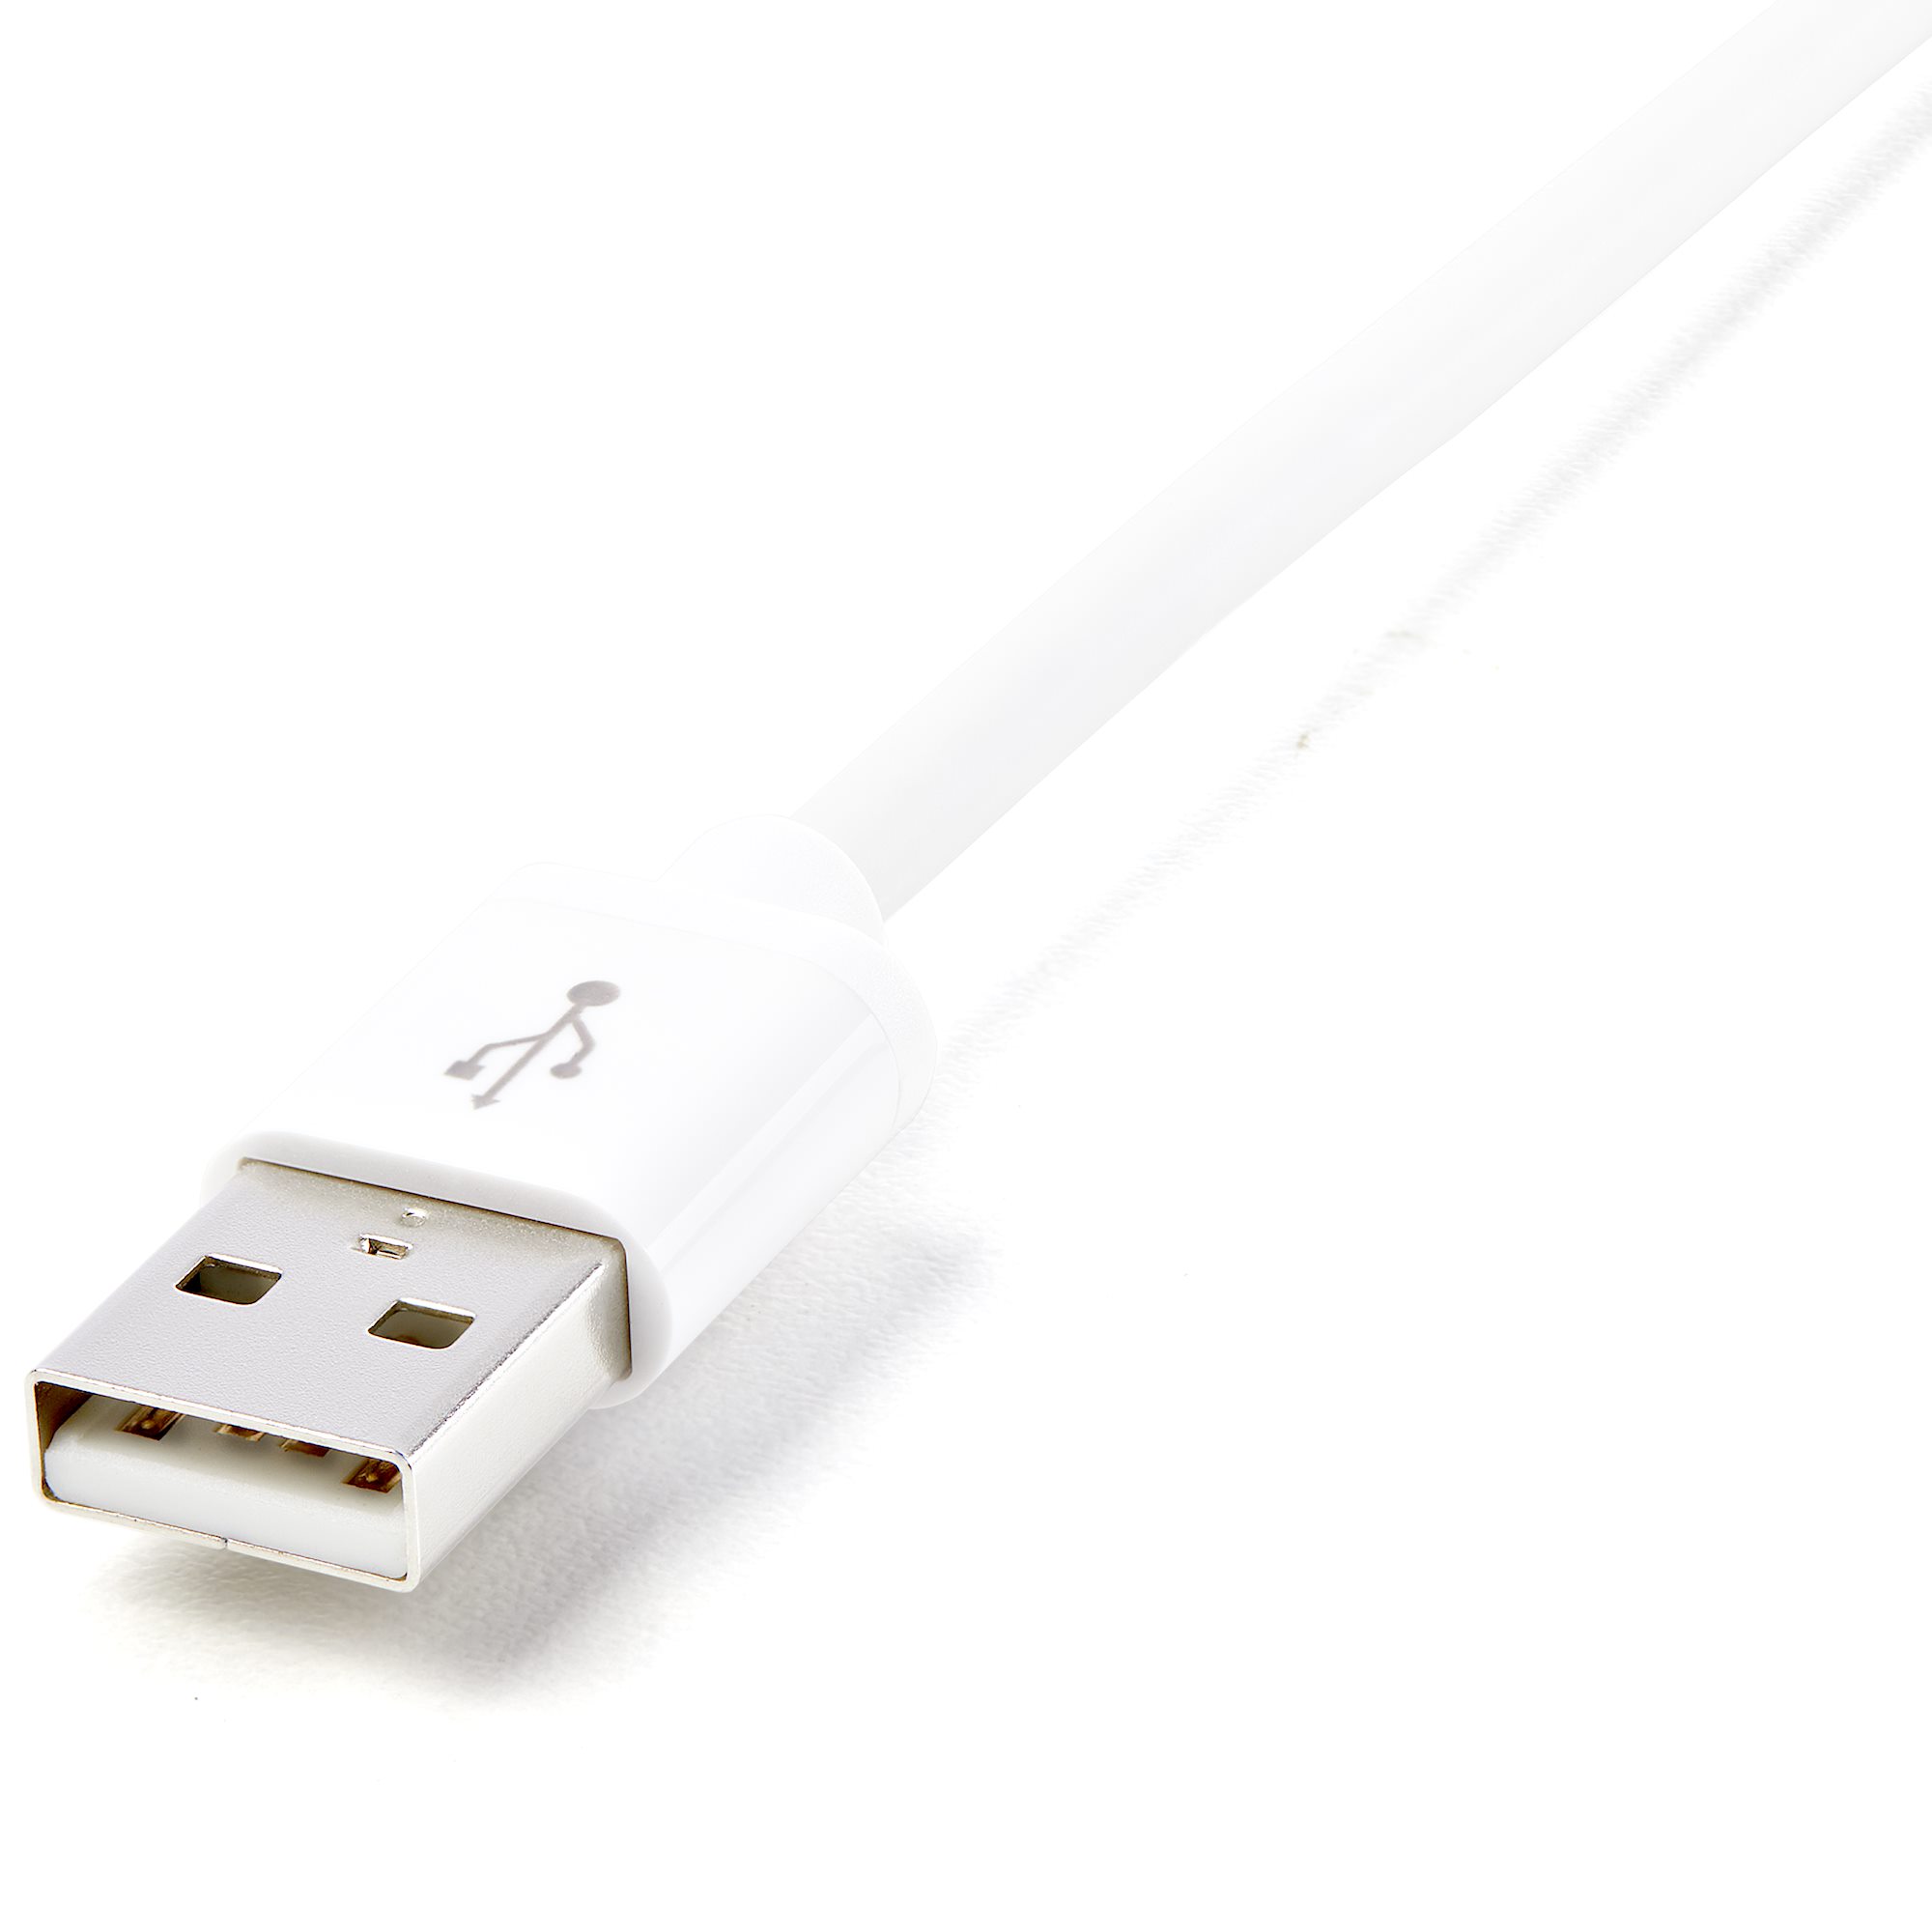 Heavy Duty USB to Lightning 1M Cable for Apple iPhone - White